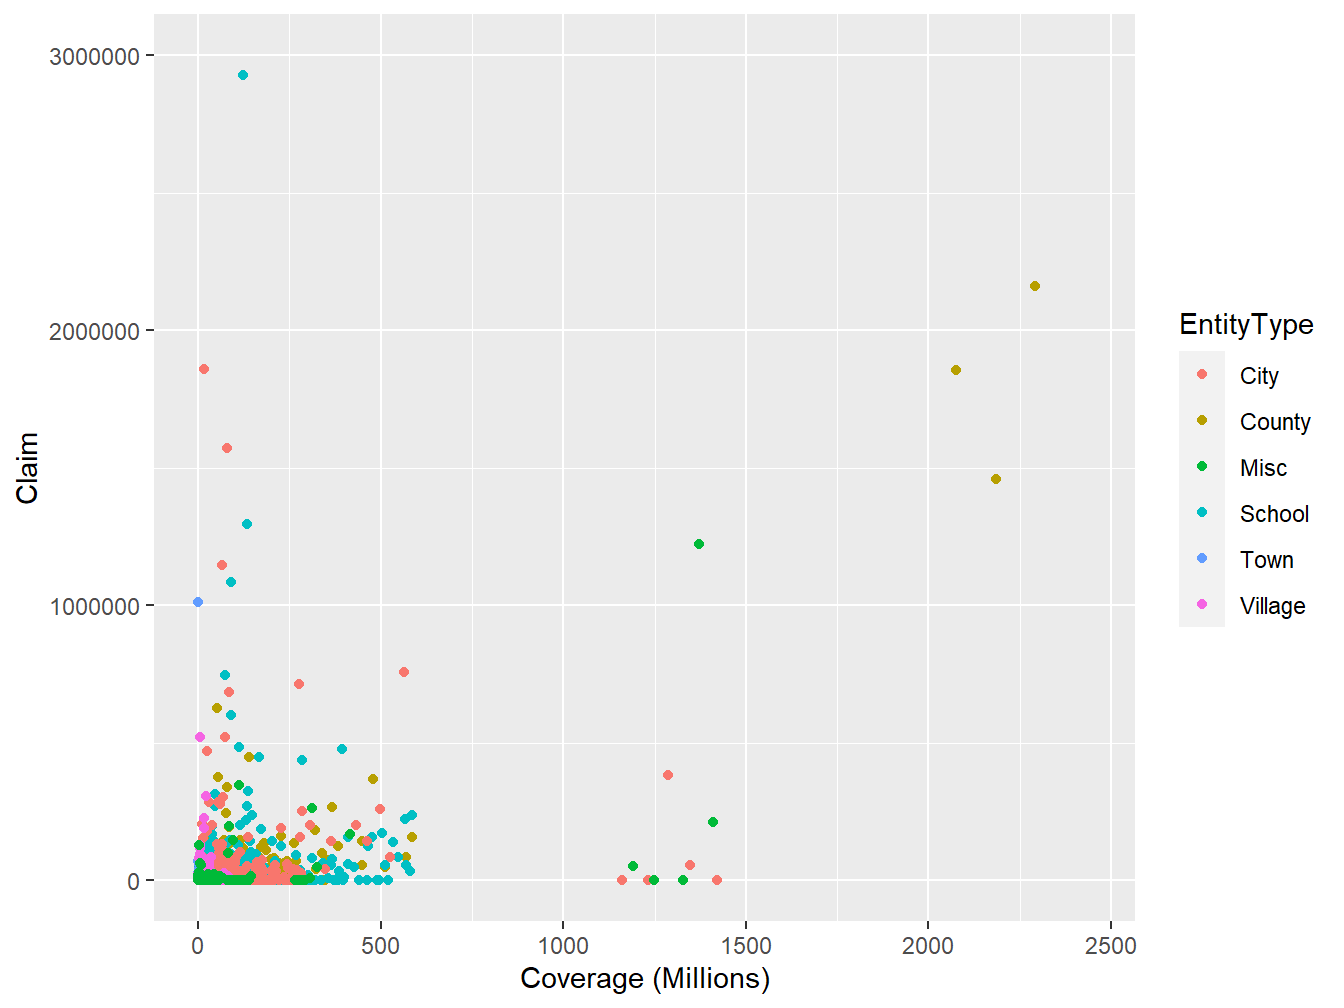 Scatter Plot of (Coverage,Claim) from LGPIF Data